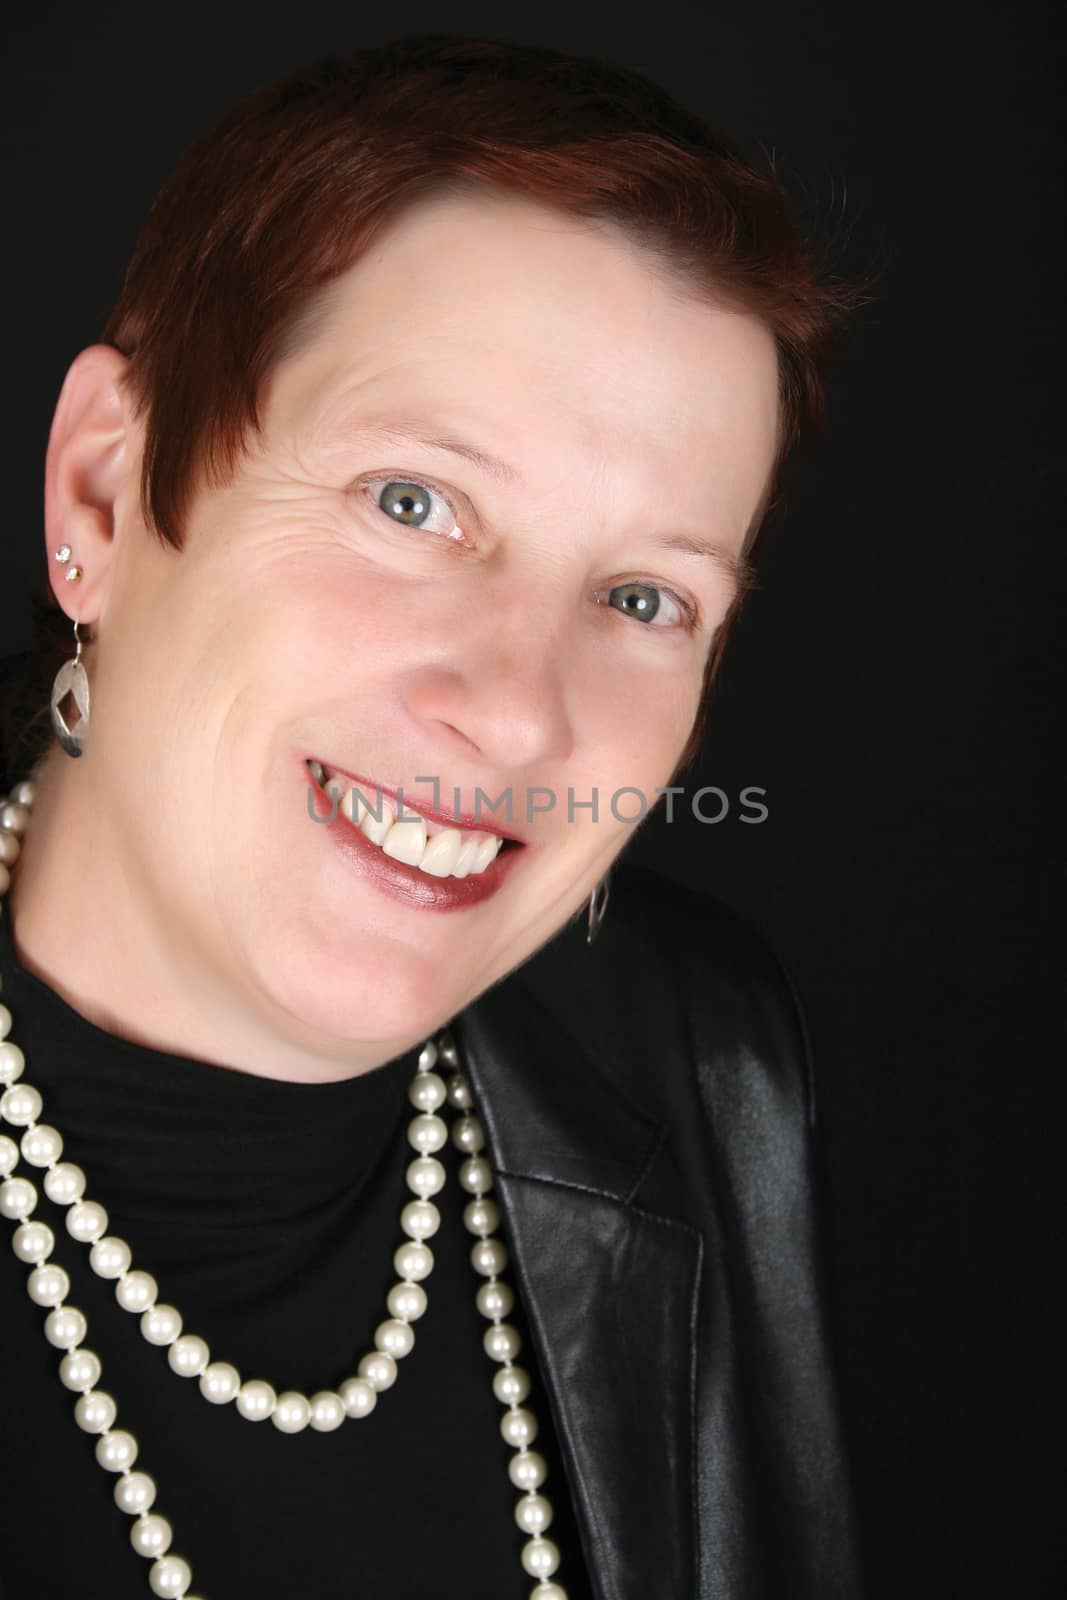 Elegant female wearing a black leather jacket and pearls